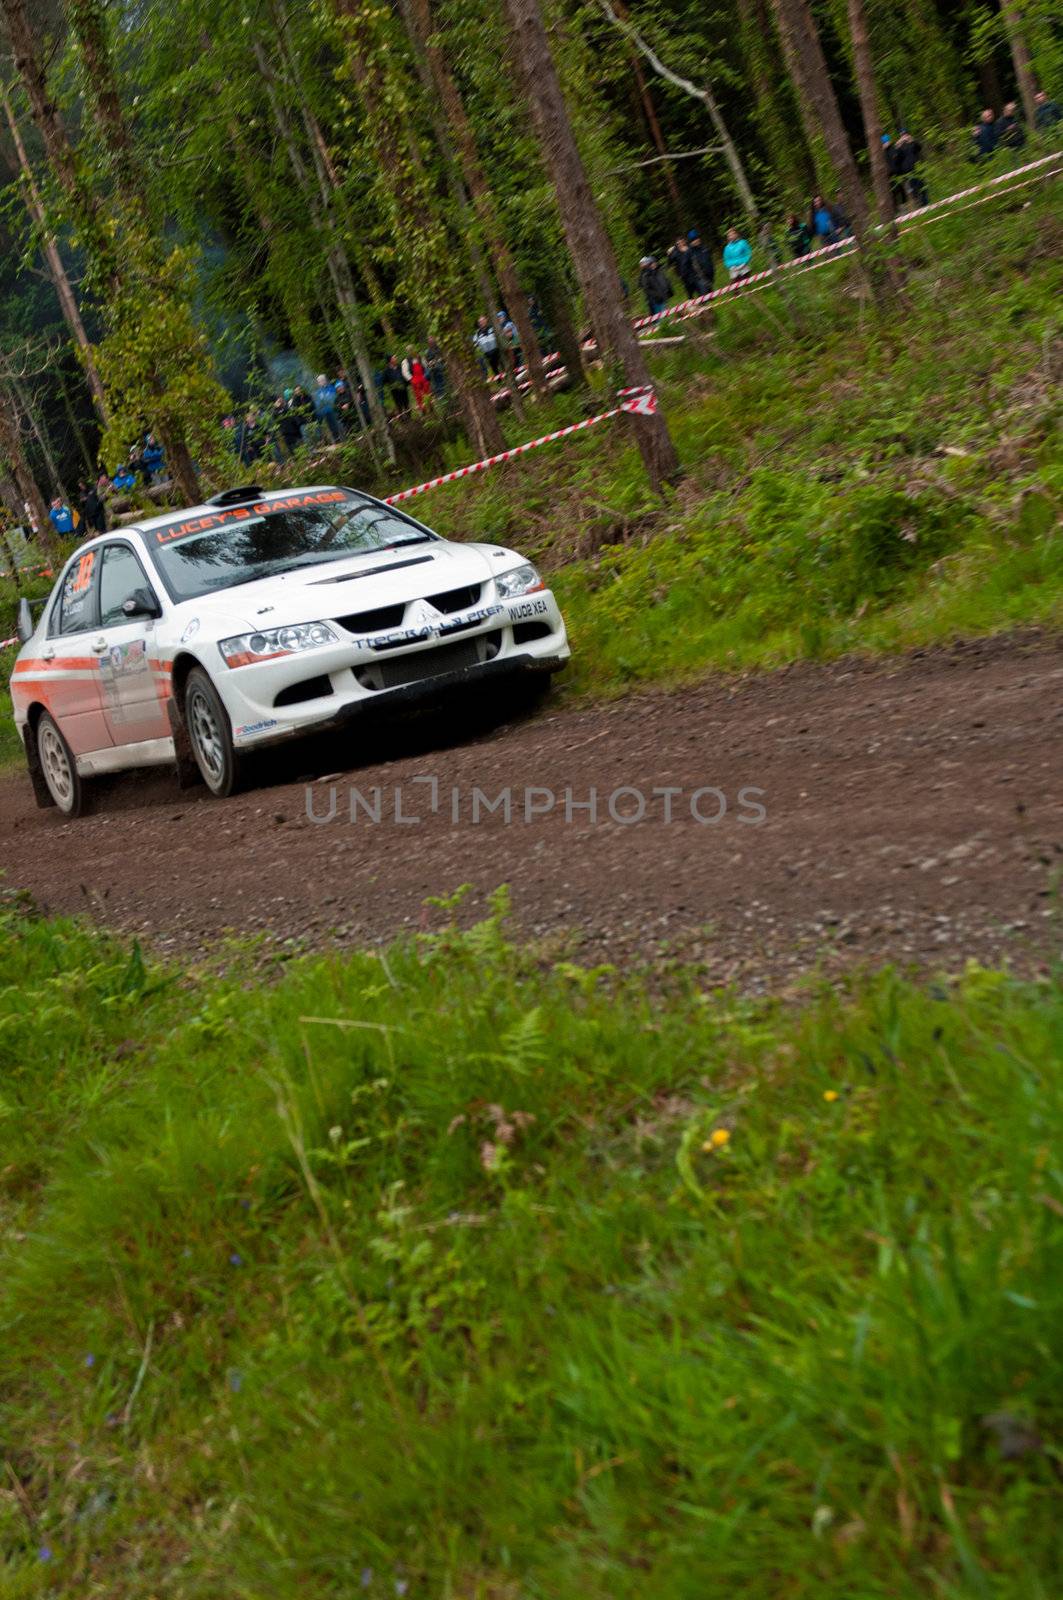 G. Lucey driving Mitsubishi Evo by luissantos84